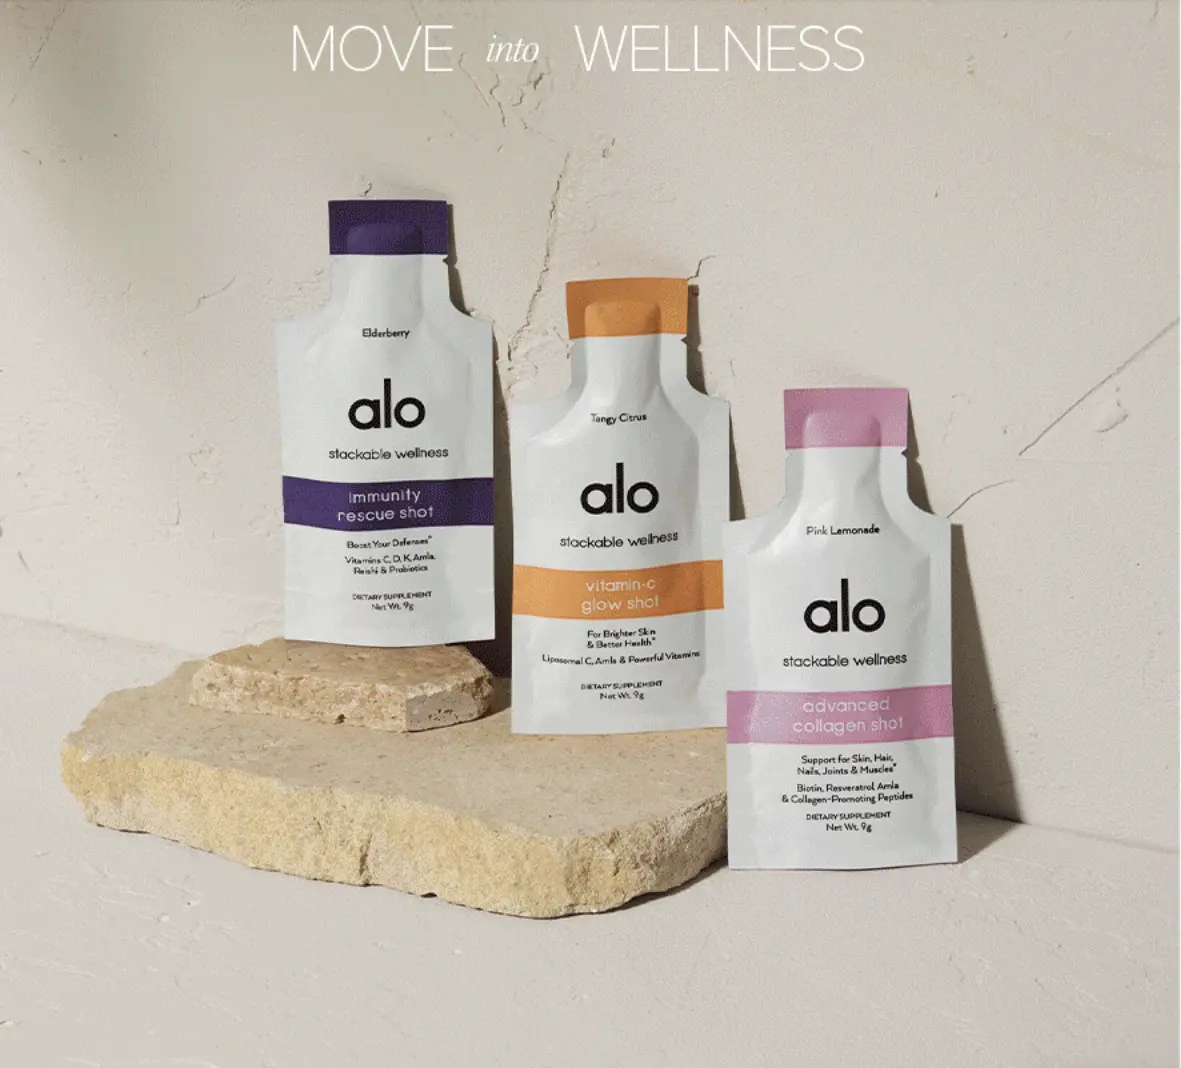 Alo Yoga Launches Supplement Line, Continuing Wellness Push